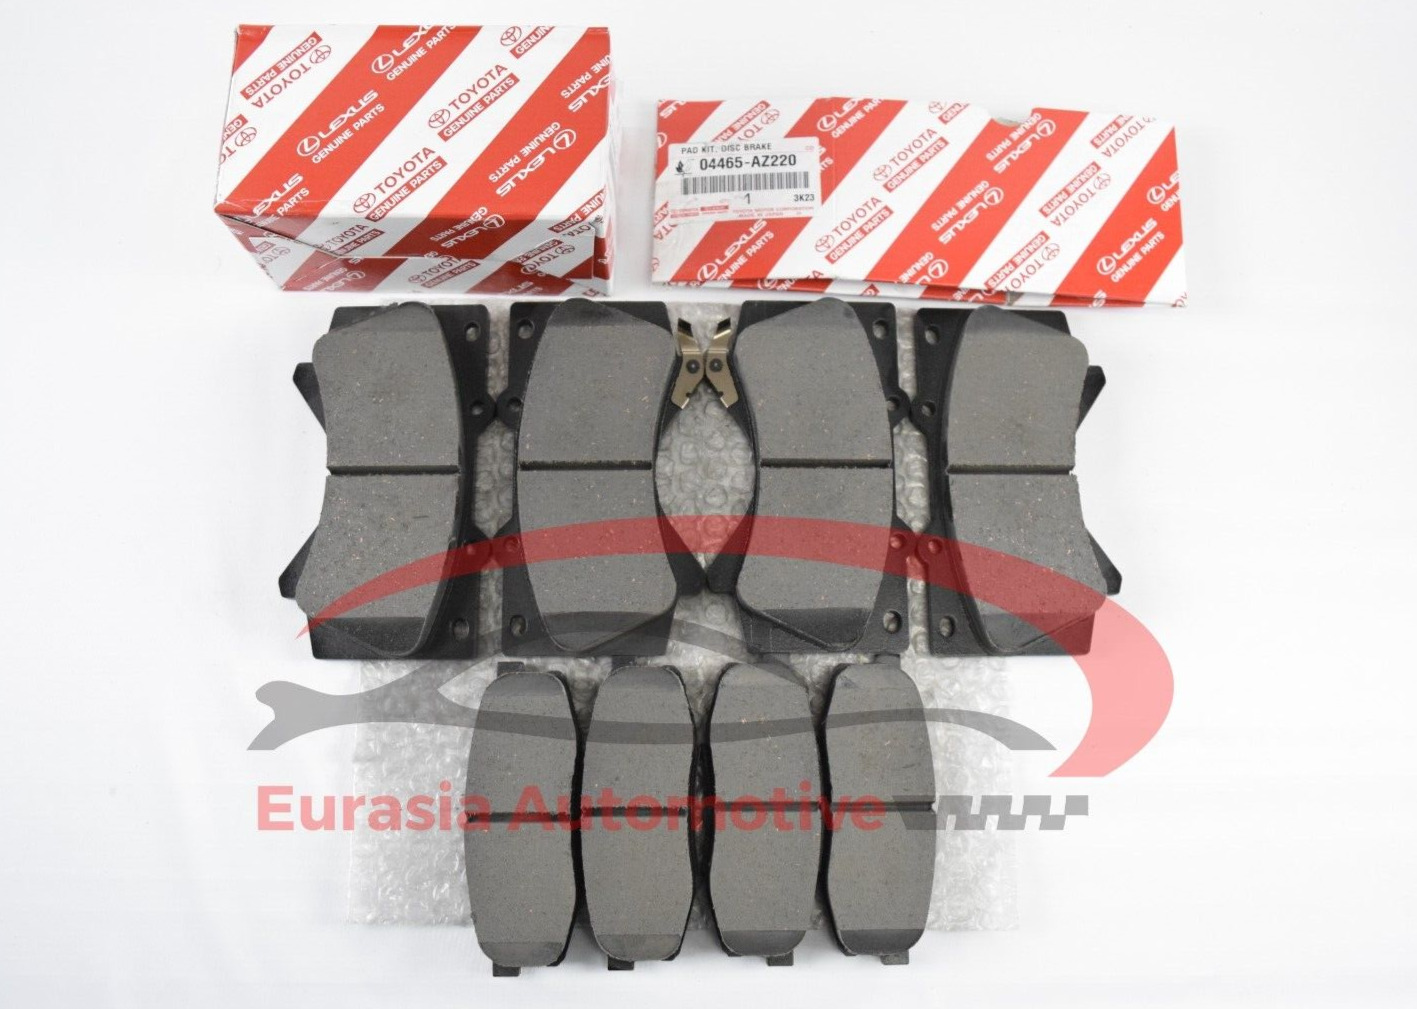 Genuine Factory Lexus LX570 2008-2020 Front and Rear OEM Brake Pads